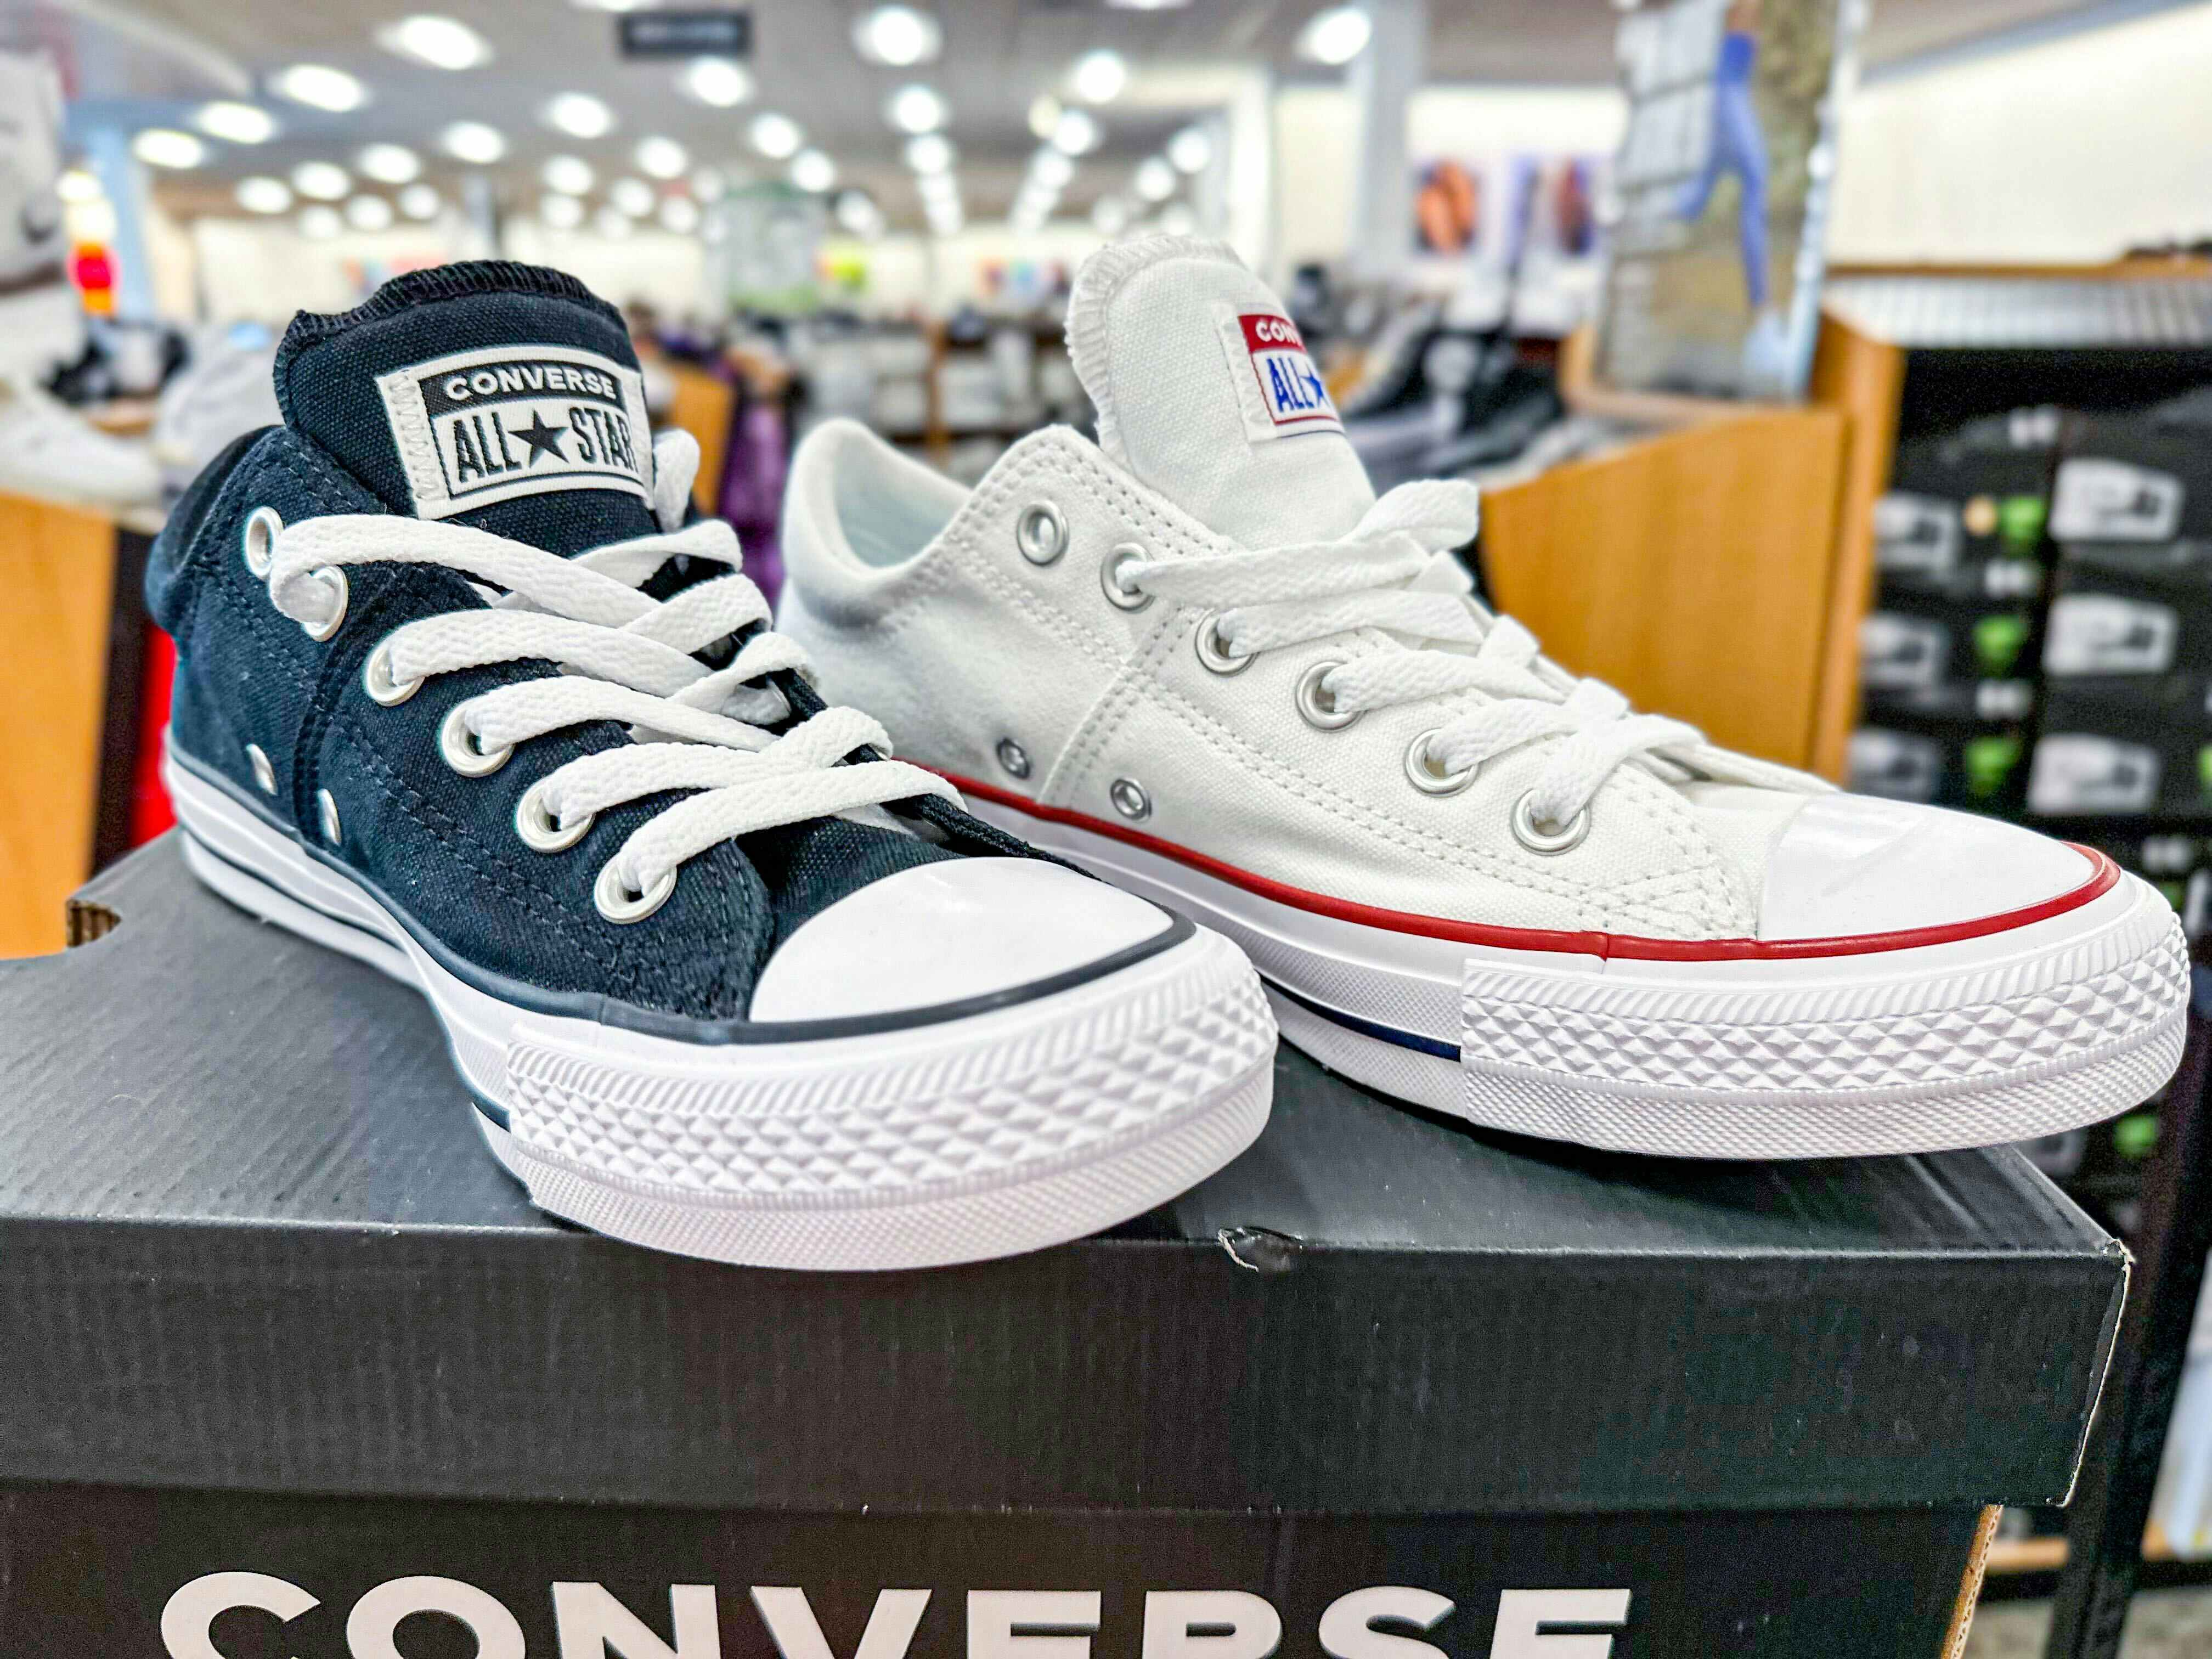 Converse Sneakers, as Low as $15 for Kids, $20 for Adults (Free Shipping)